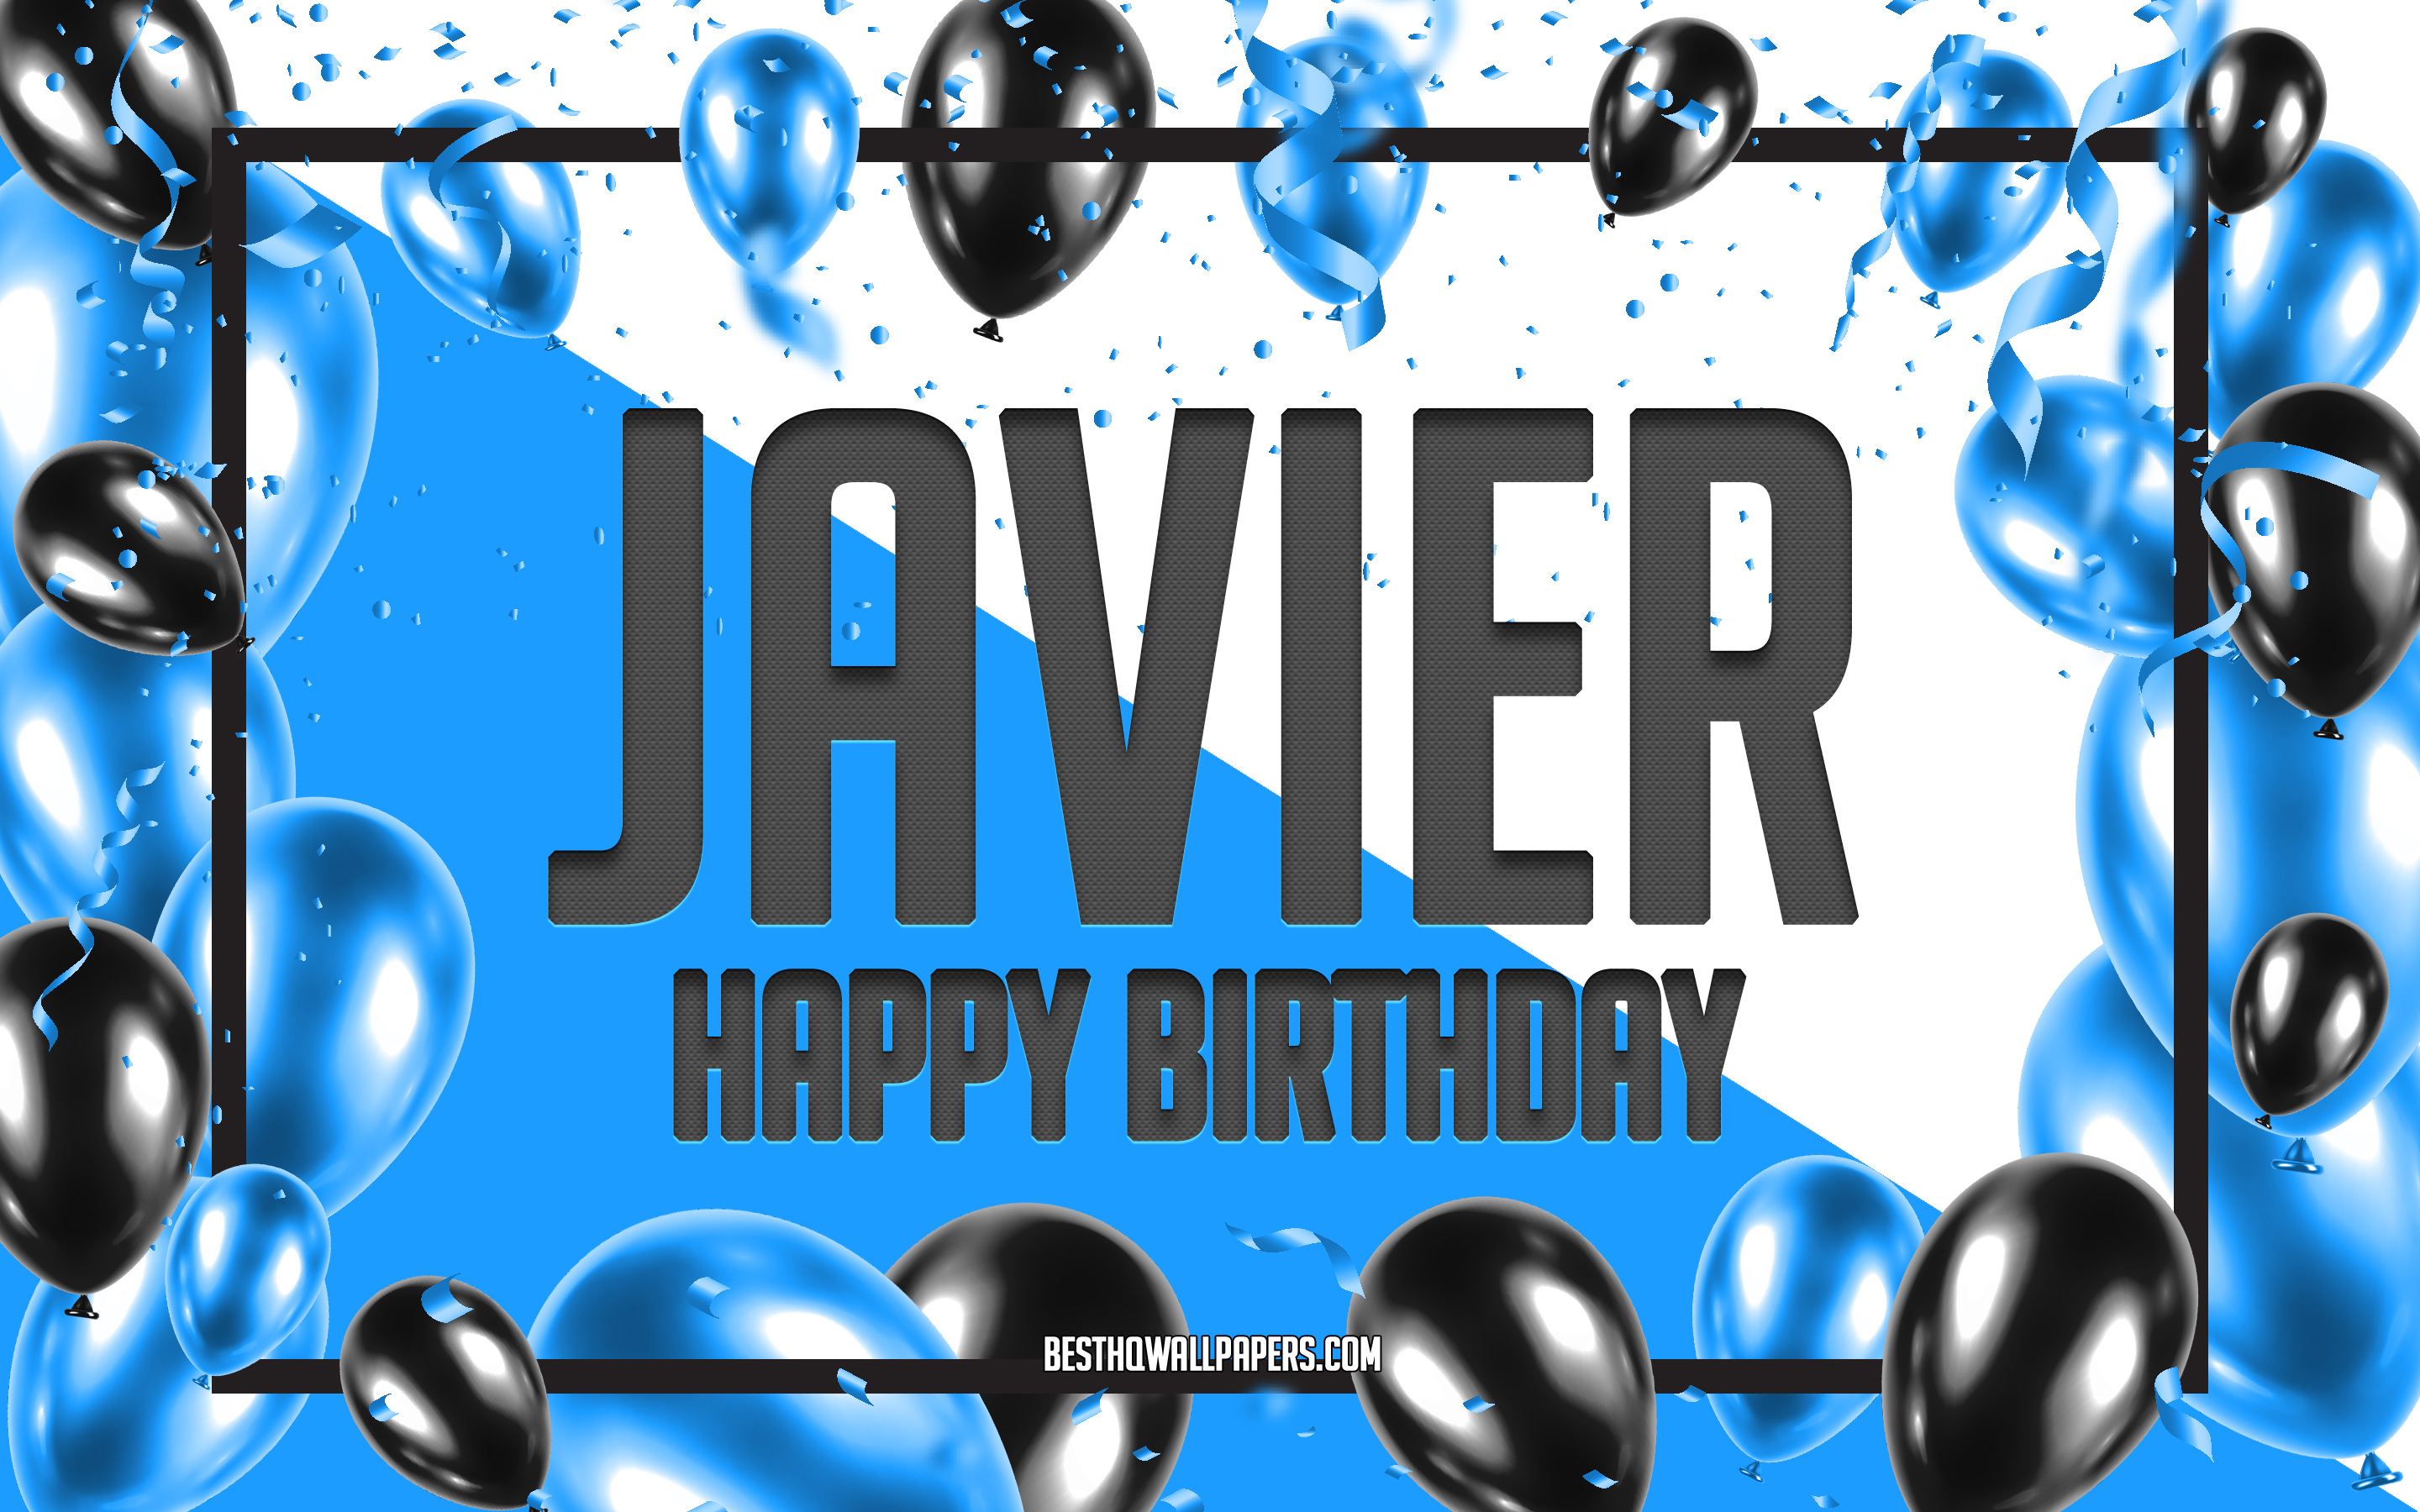 Download Wallpapers Happy Birthday Javier Birthday Balloons Background